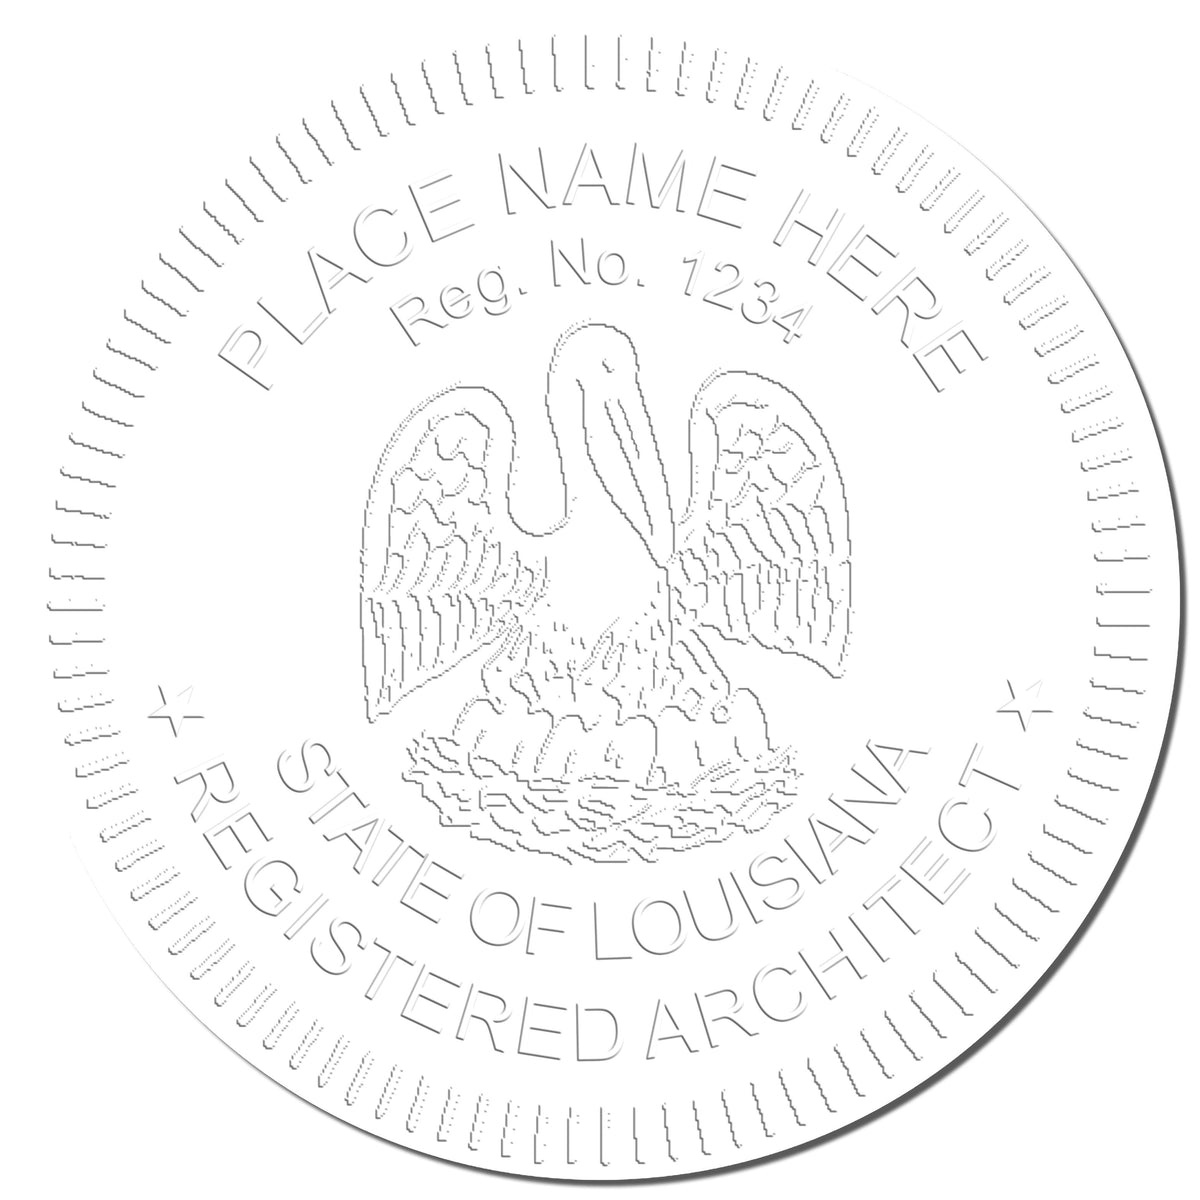 This paper is stamped with a sample imprint of the Hybrid Louisiana Architect Seal, signifying its quality and reliability.